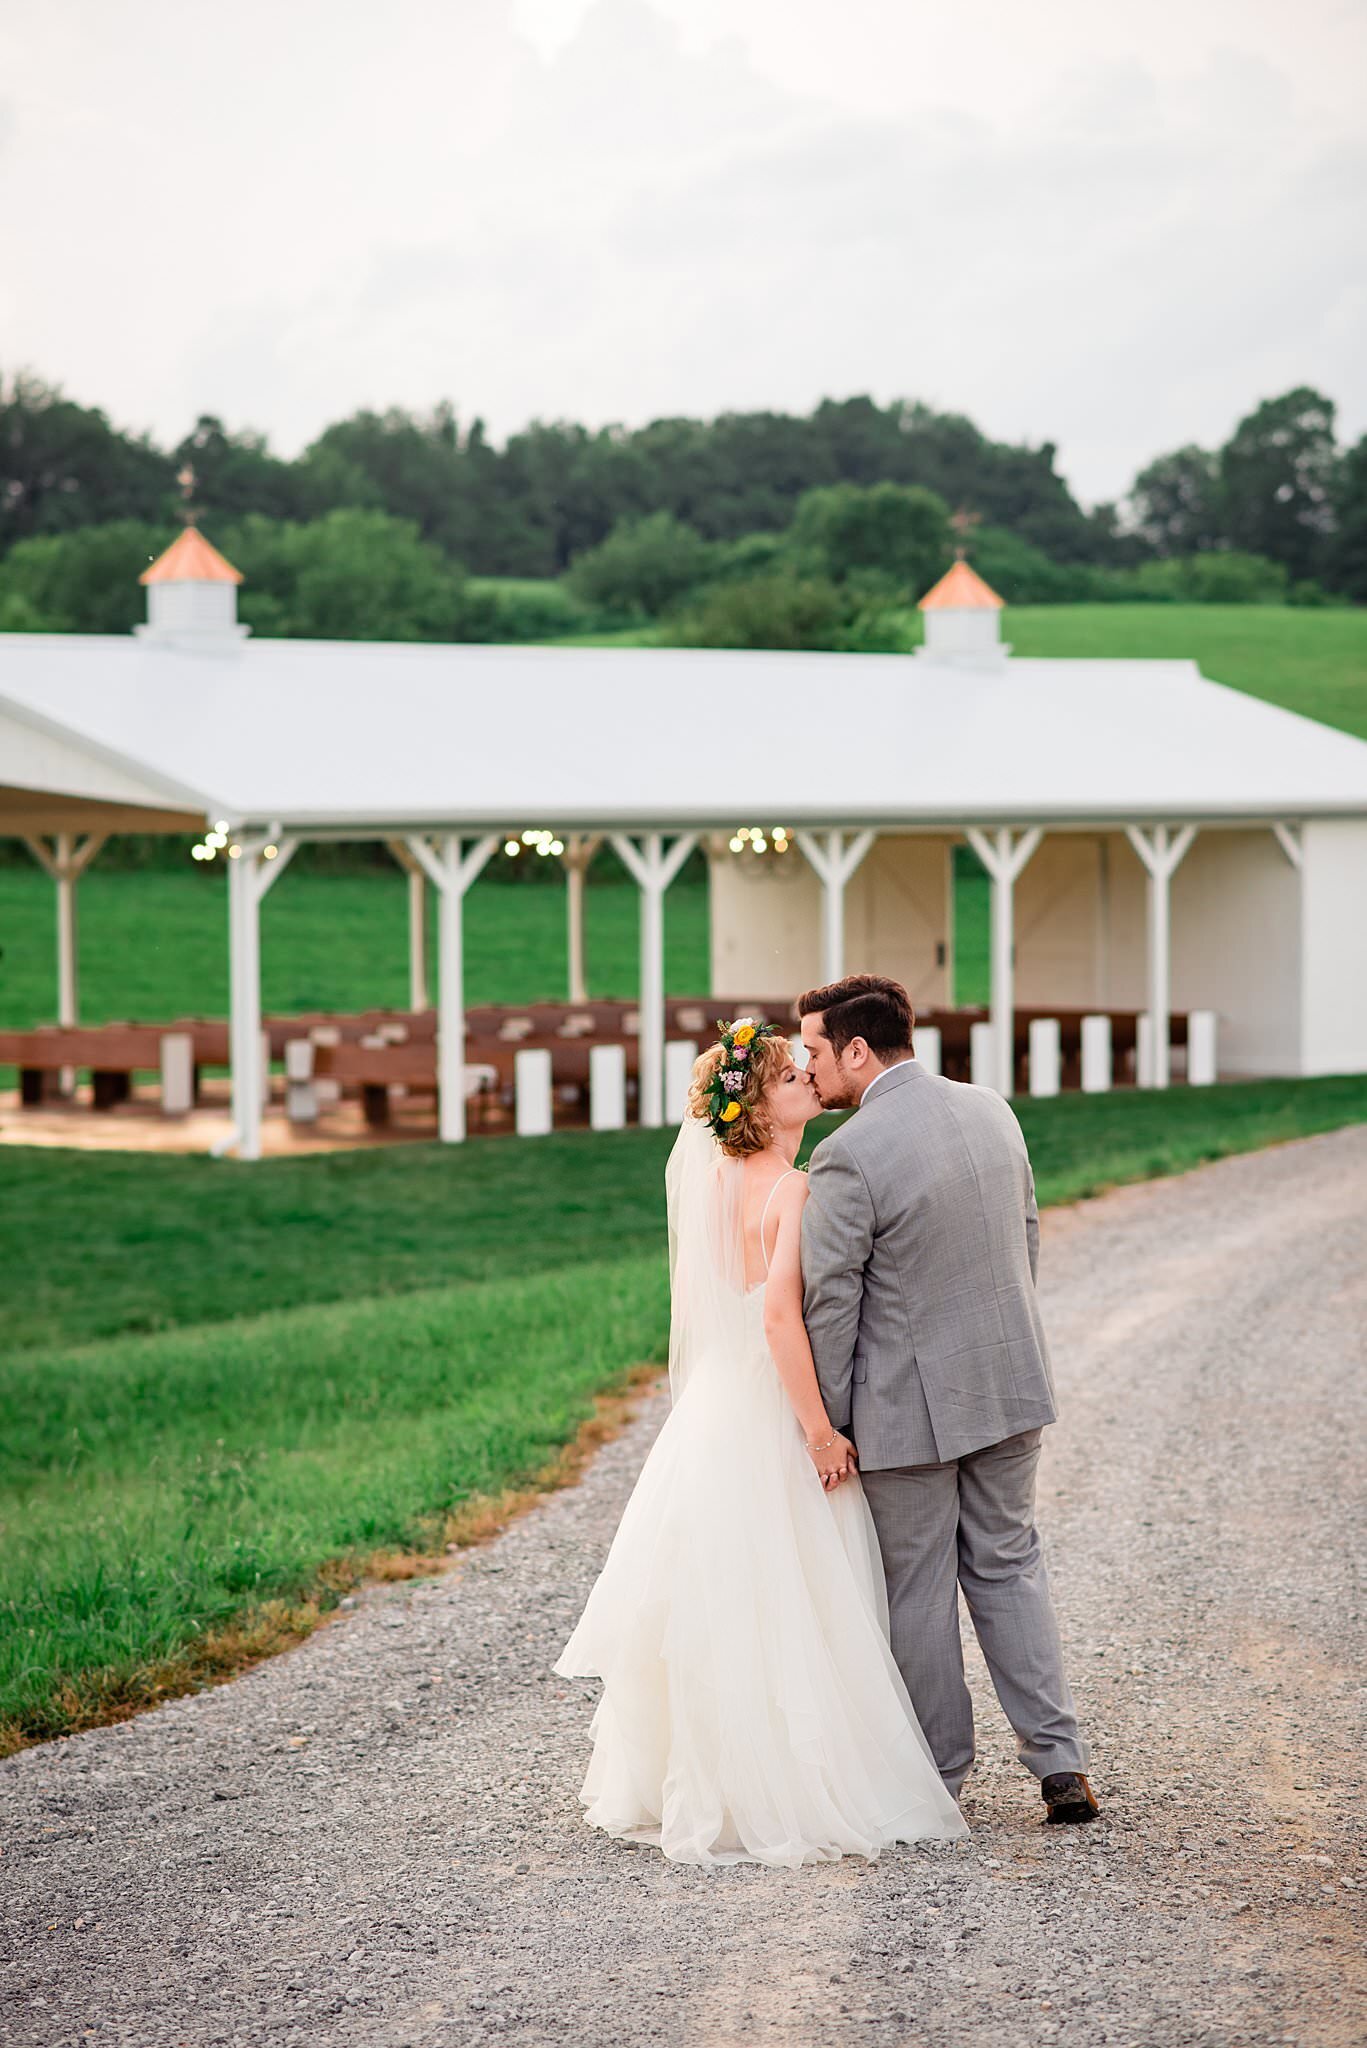 Bride and Groom walking hand in hand down gravel road towards the ceremony pavilion at White Dove Barn, they paused to lean in for a kiss